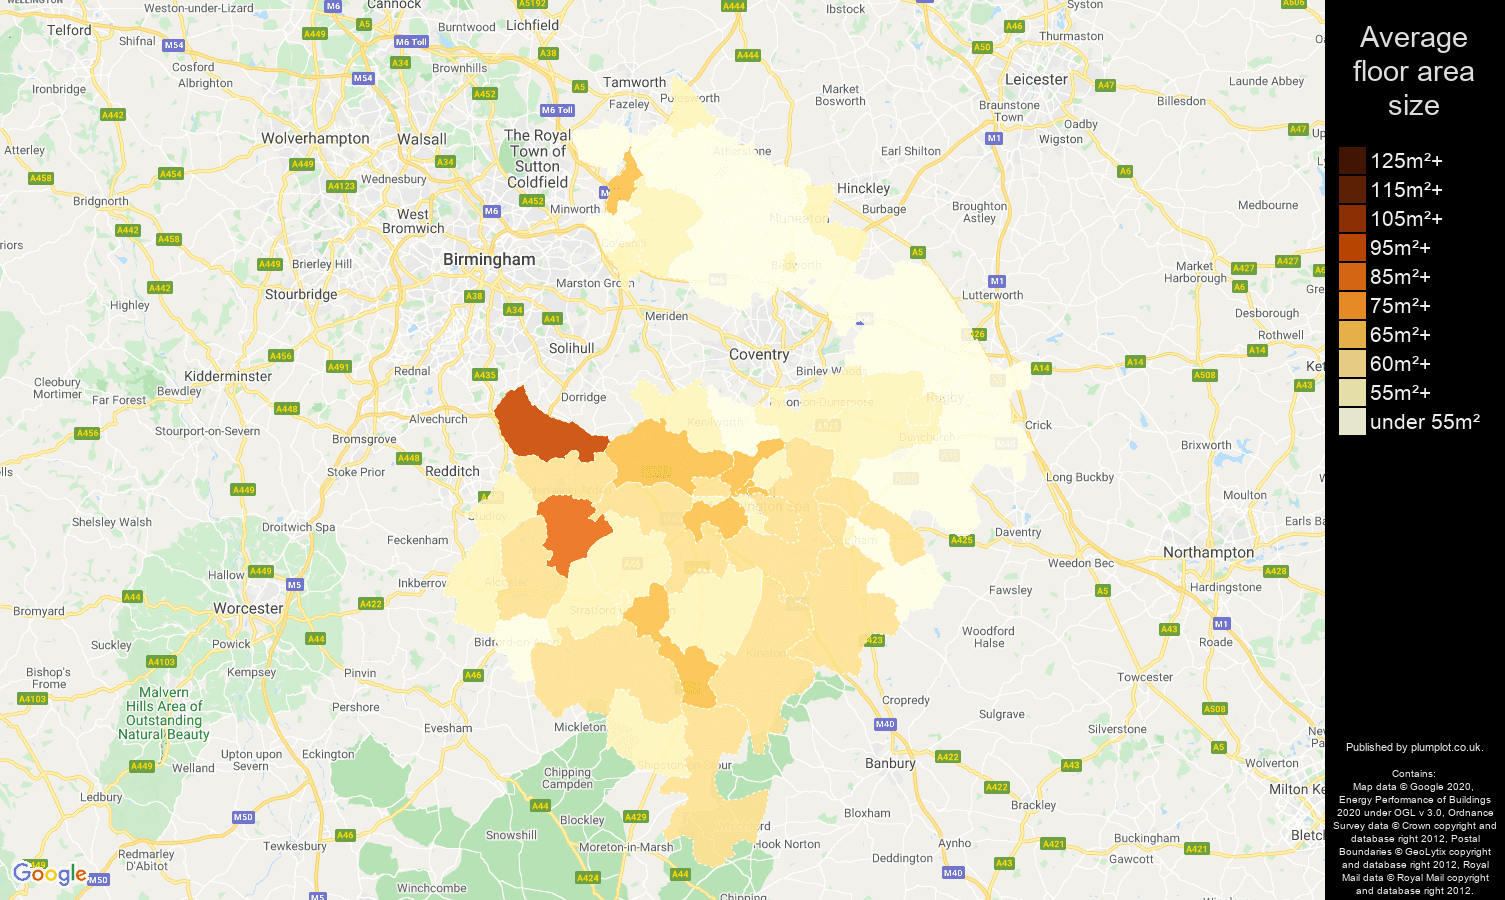 Warwickshire map of average floor area size of flats